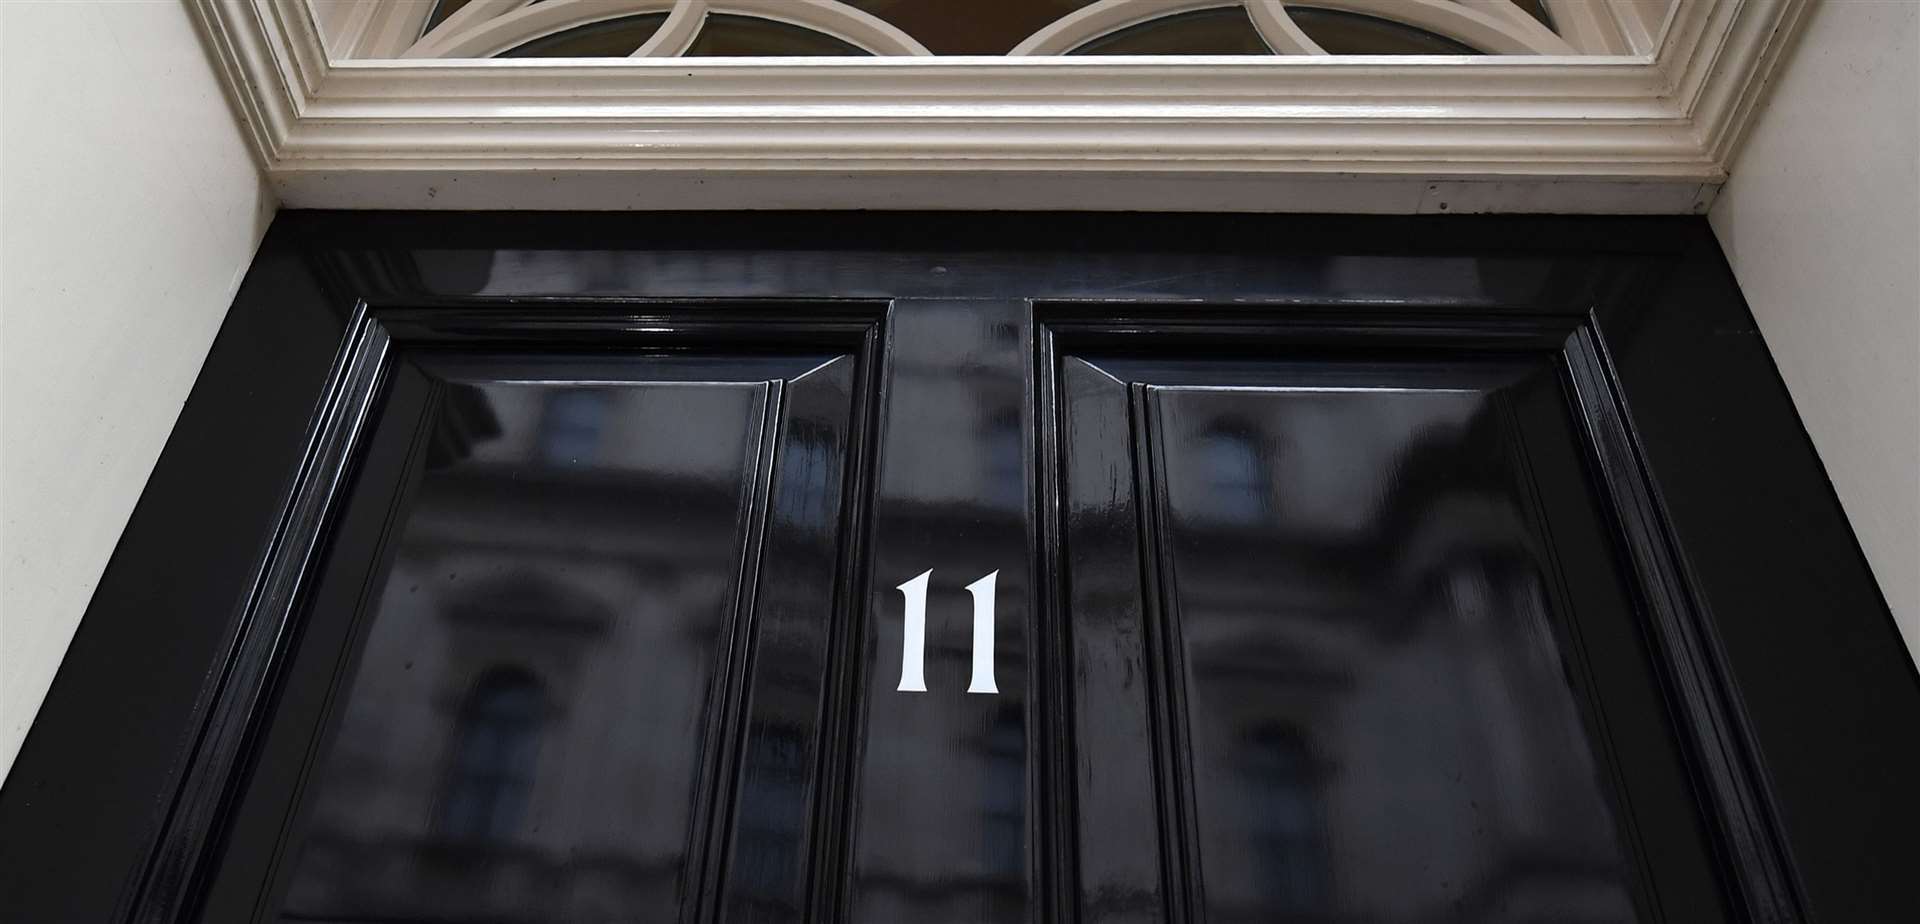 The work was carried out in the flat at Number 11 (PA)